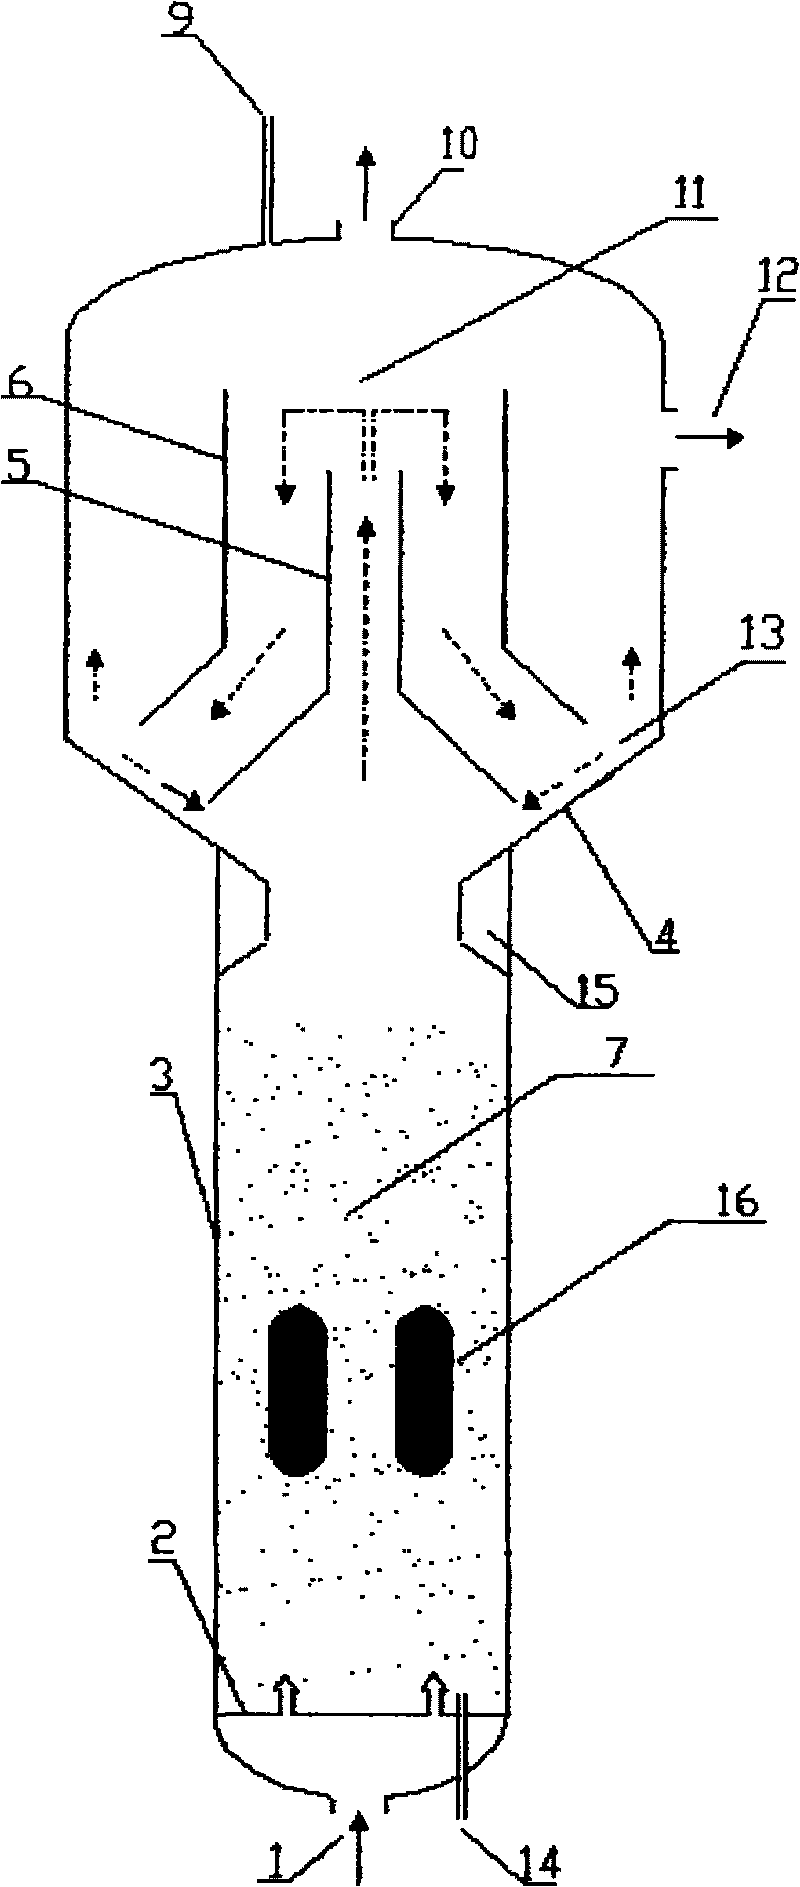 Three-phase fluidized bed reactor